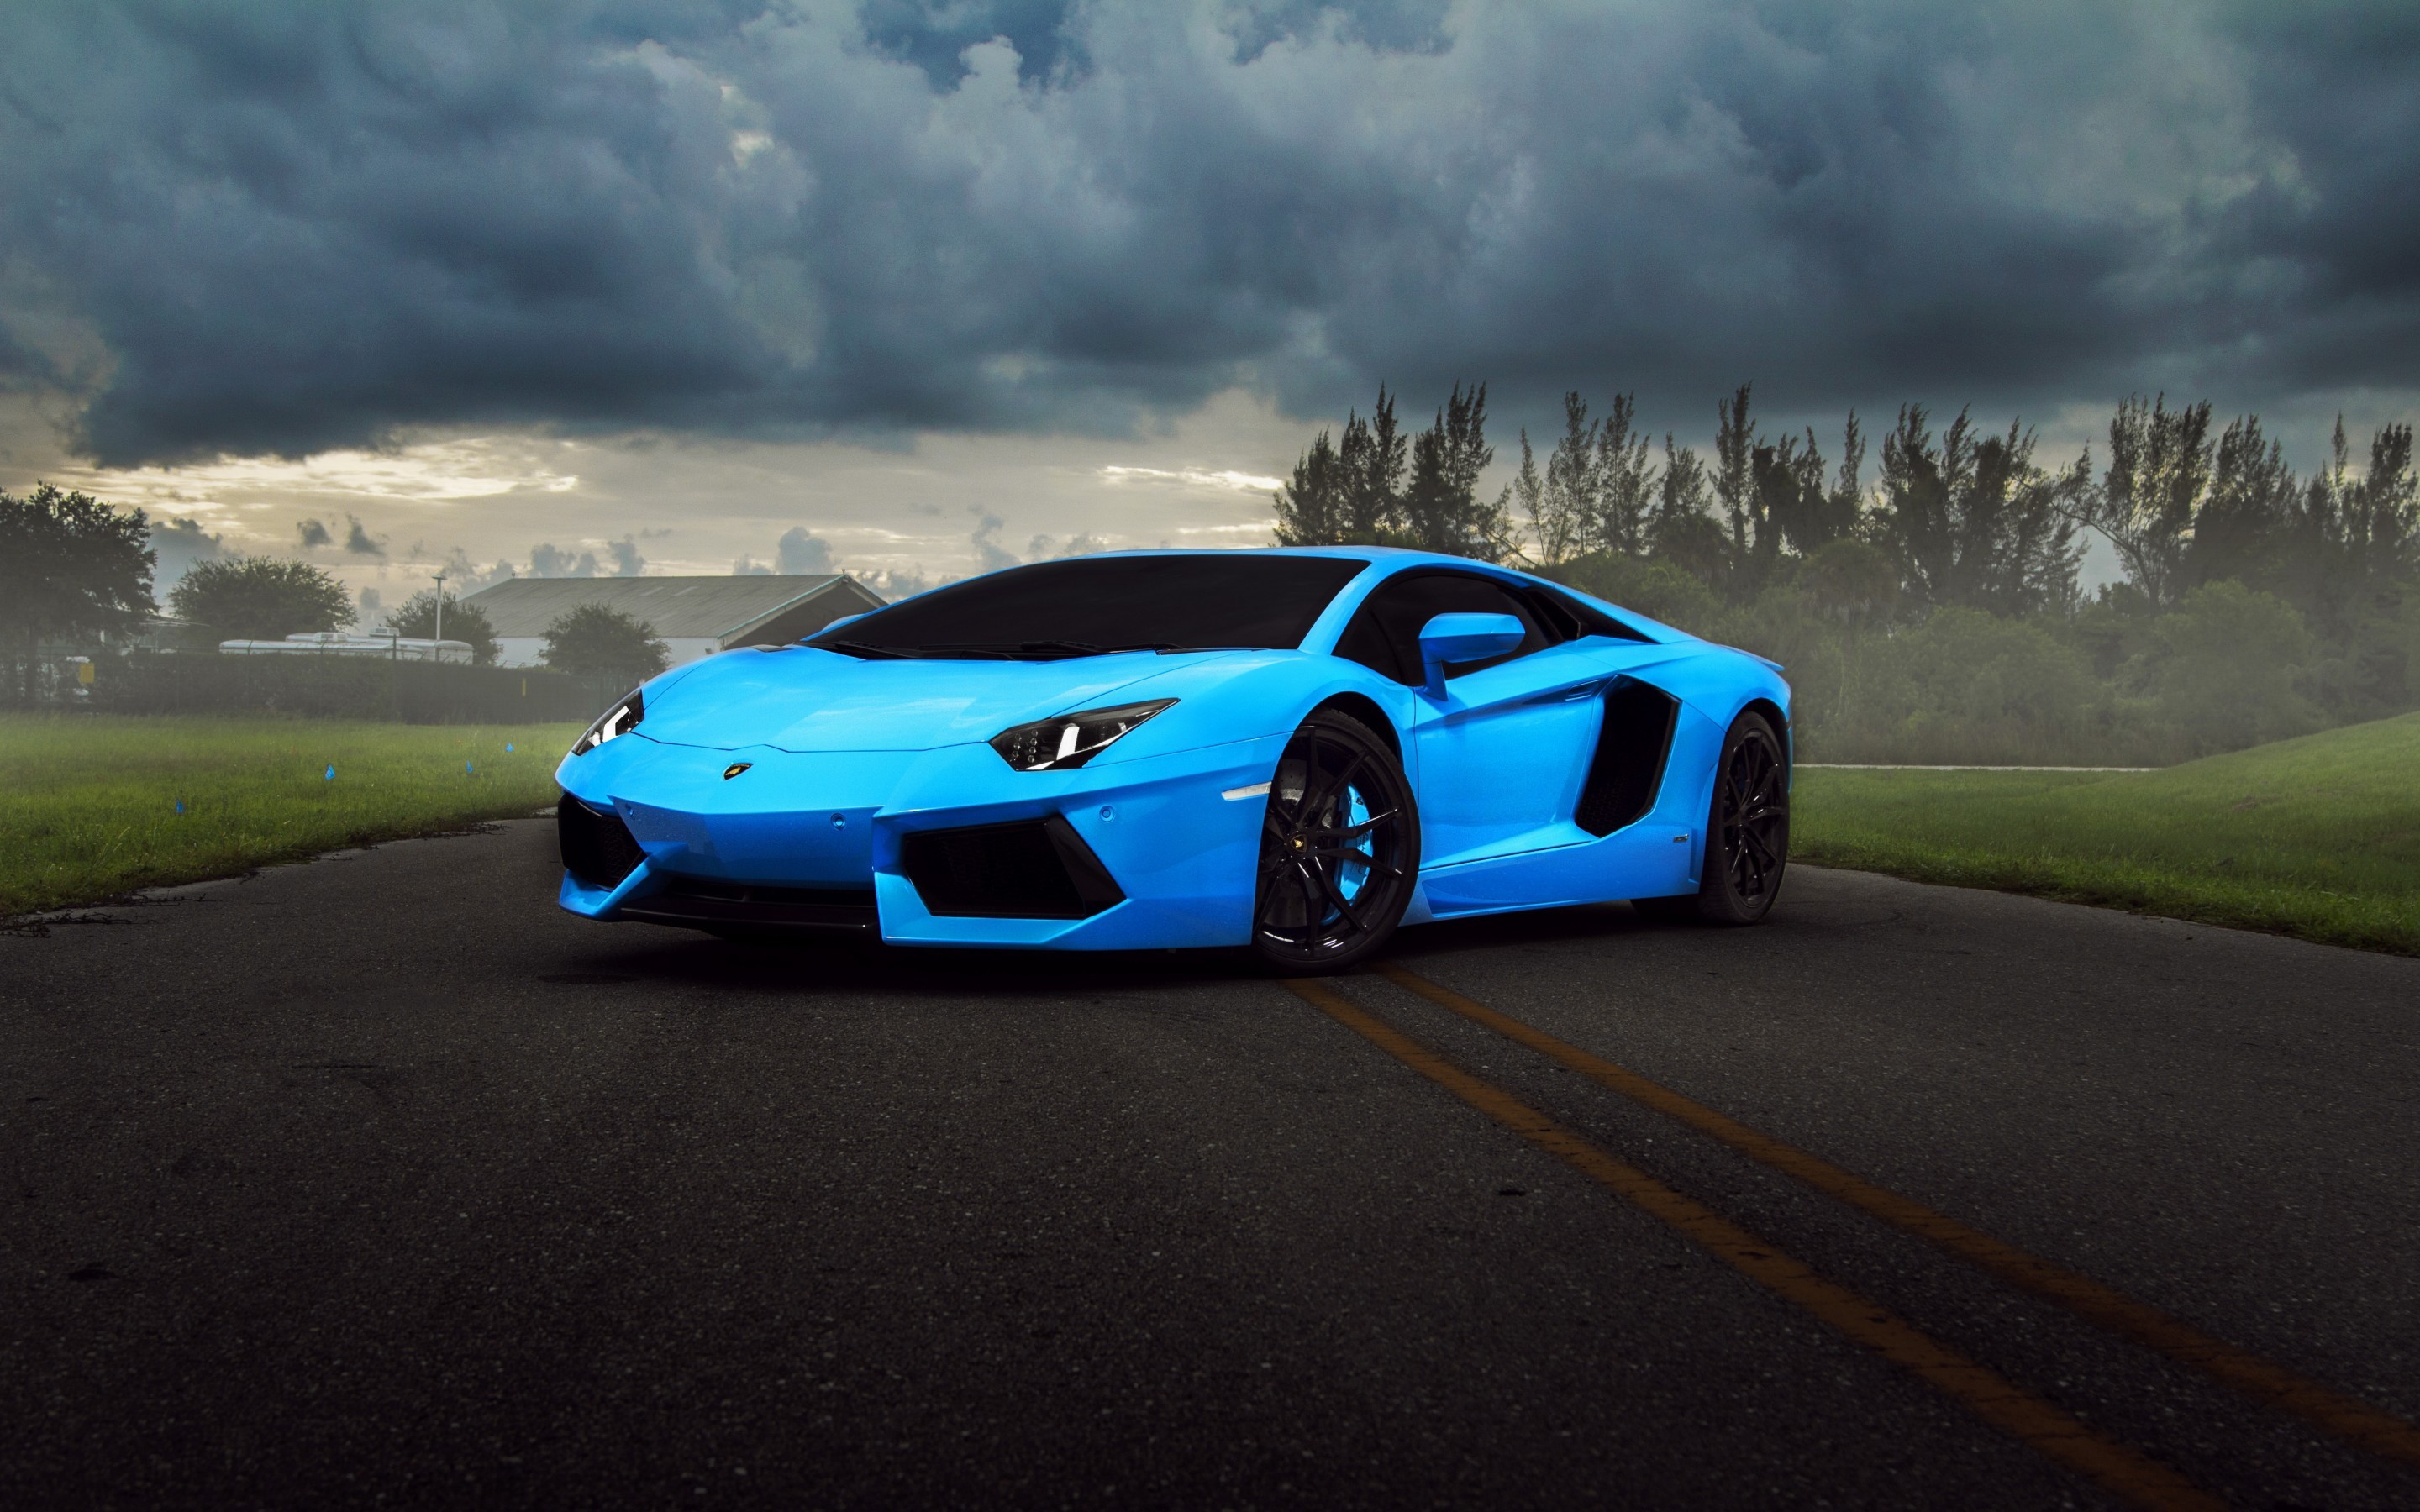 2880x1800 ... 83 entries in Supercars Wallpapers HD group ...